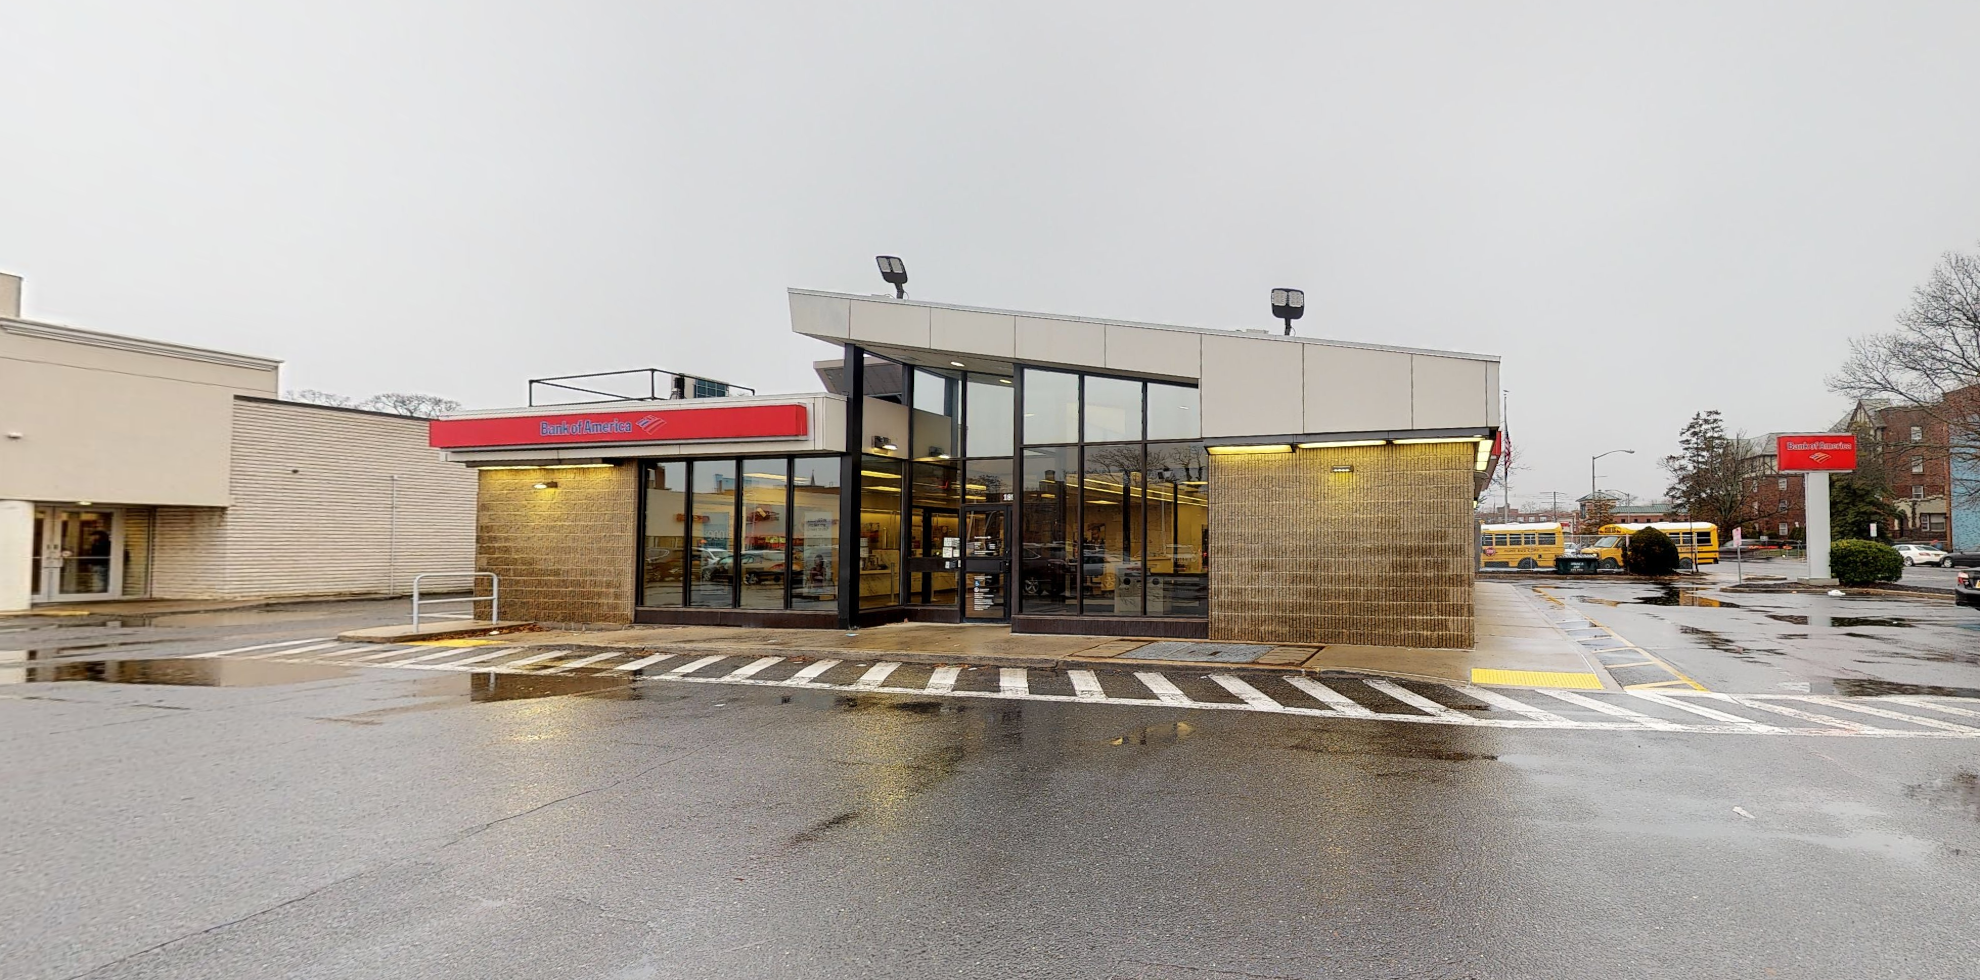 Bank of America financial center with drive-thru ATM | 189 W Merrick Rd, Freeport, NY 11520